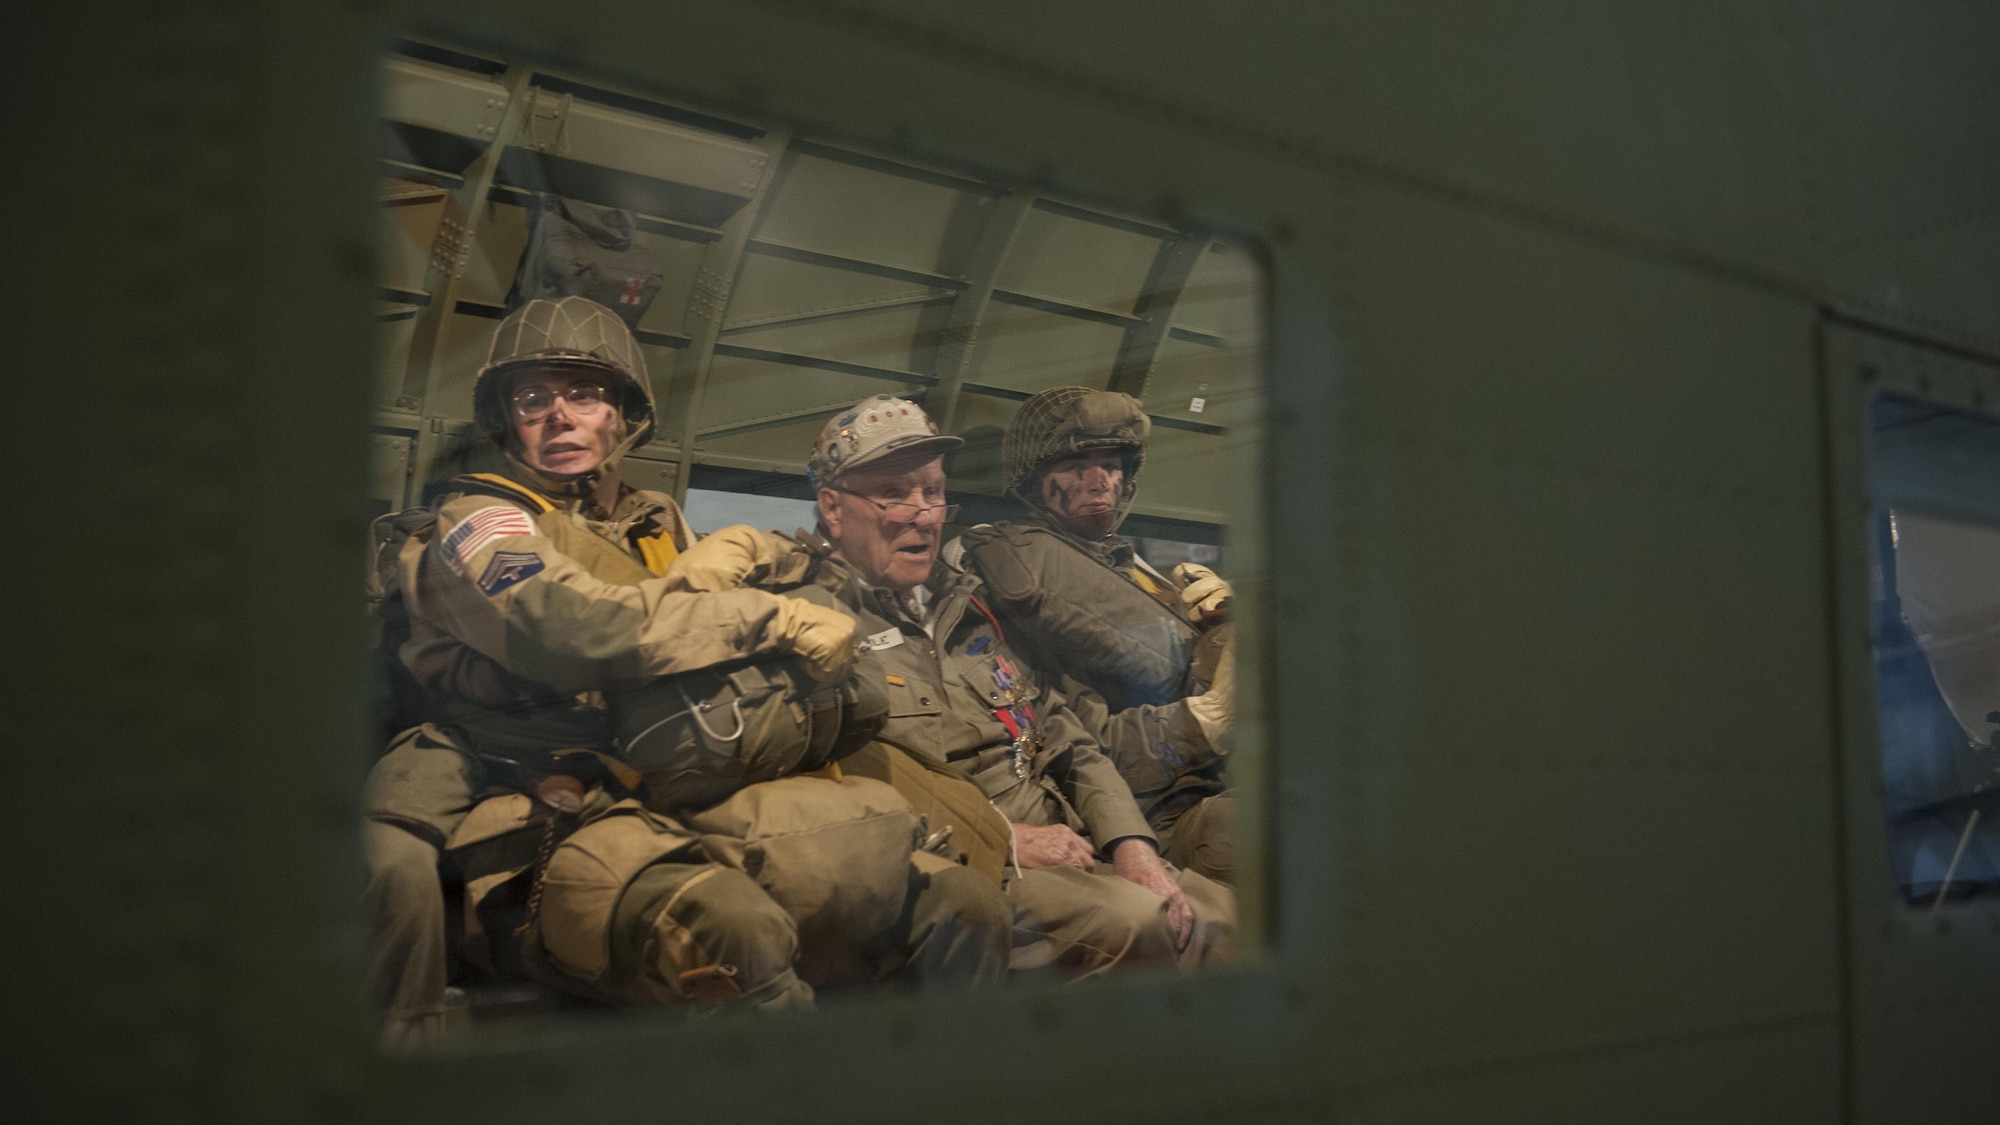 George Shenkle (center) sits between Daniel Dillier and Christian Holland, reenactors depicting World War II-era paratroopers from the 82nd Airborne Division, onboard a C-47A Skytrain April 18, 2015, at the Air Mobility Command Museum near Dover Air Force Base, Del. (U.S. Air Force photo/Airman 1st Class Zachary Cacicia)